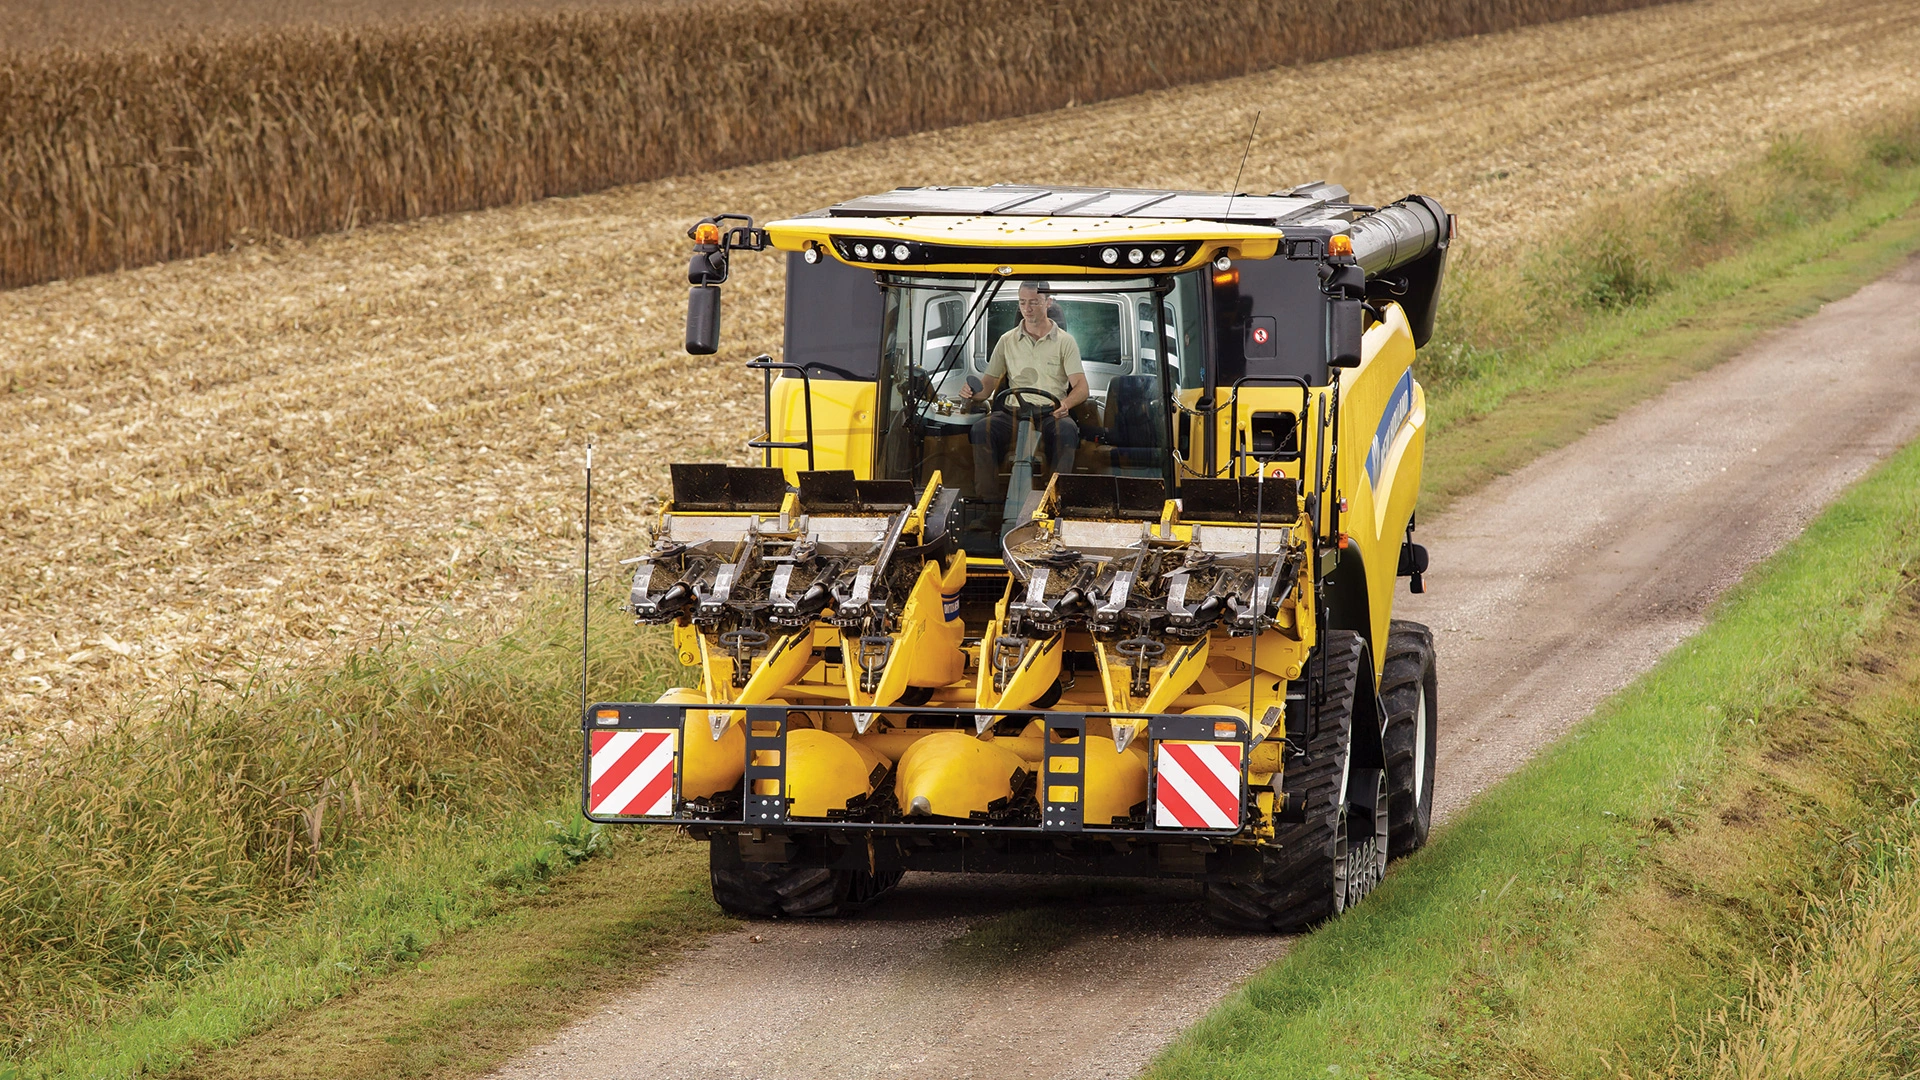 New Holland Maize Headers; yellow harvester on rural road, ready for cornfield harvest with clear skies.